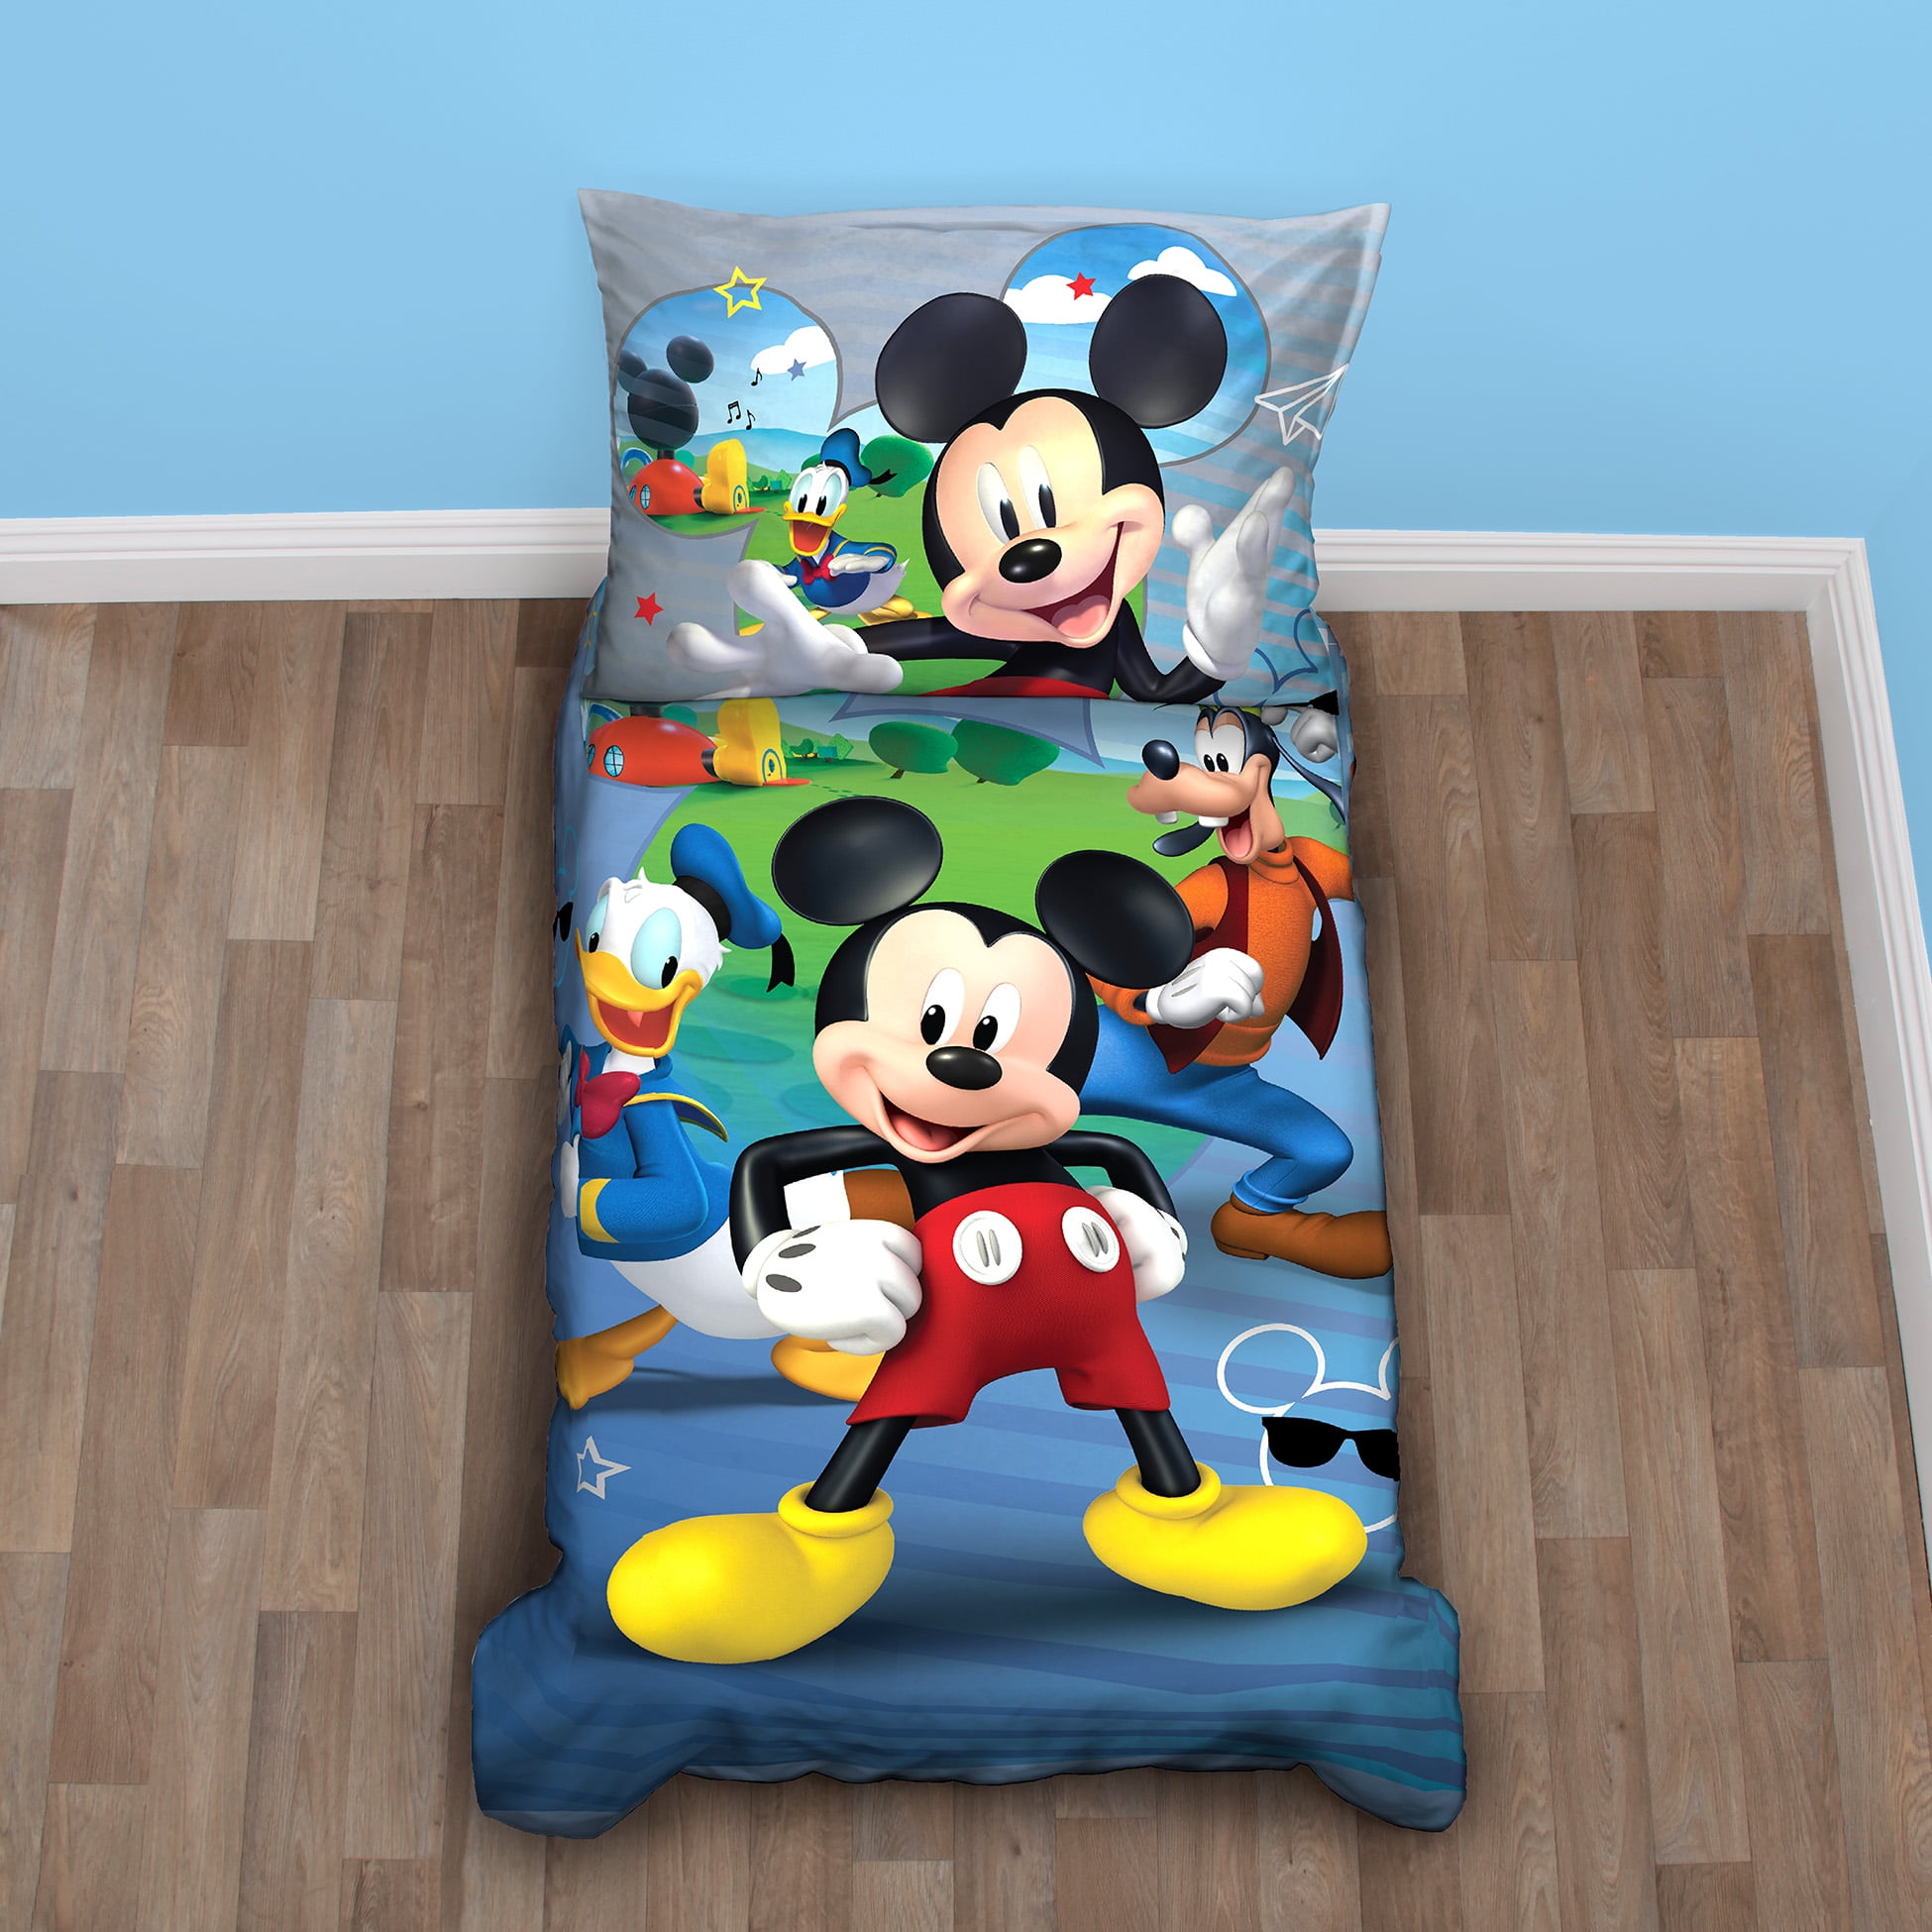 herberg Volg ons schilder Disney Mickey Mouse Fun with Friends Toddler Bedding Sets, Toddler Bed,  Blue, 4-Piece - Walmart.com